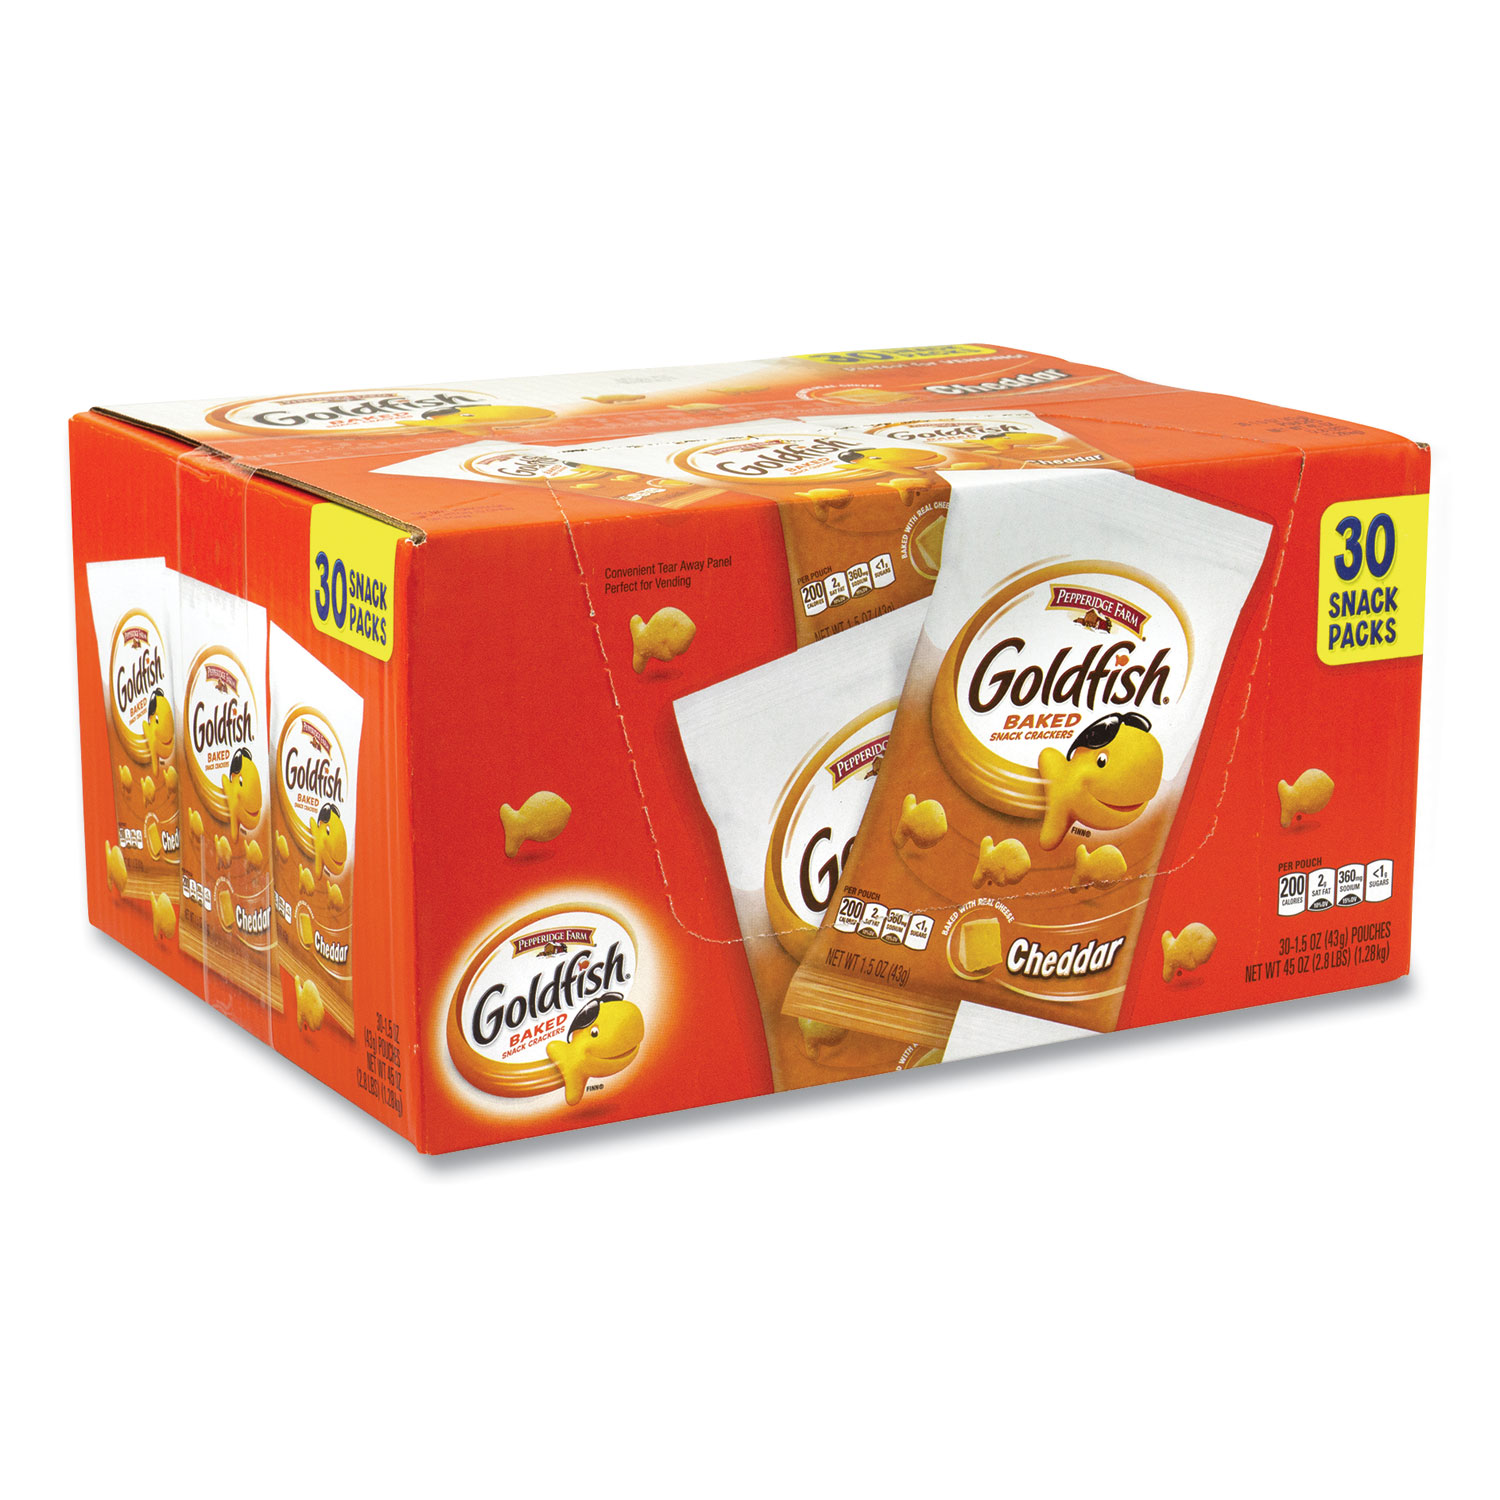  Pepperidge Farm 36787 Goldfish Crackers, Cheddar, 1.5 oz Bag, 30 Bags/Box, Free Delivery in 1-4 Business Days (GRR22000493) 